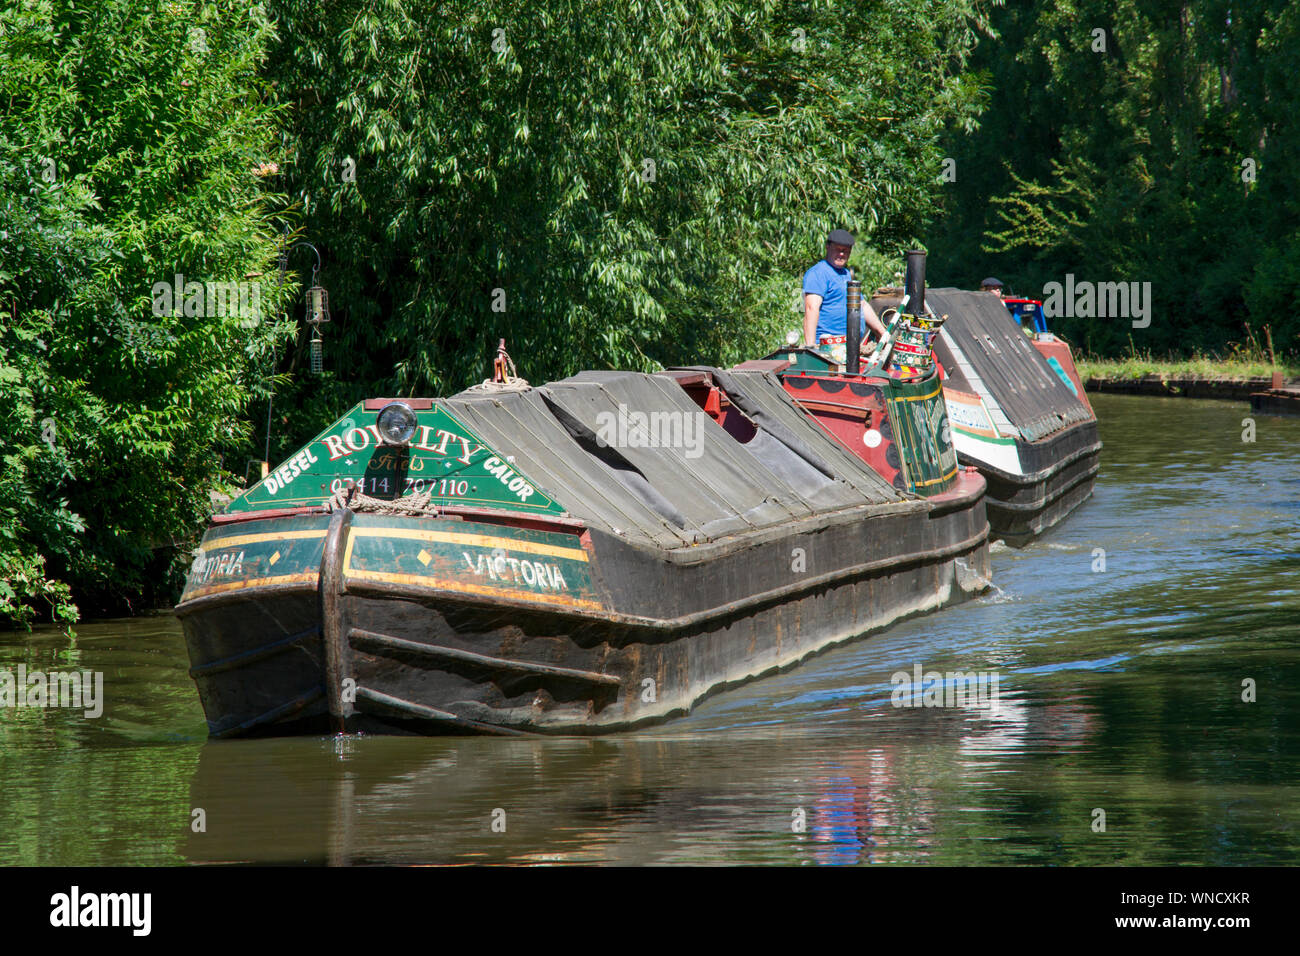 Royalty class narrowboat Victoria with butty Mercury, Grand Union Canal, Milton Keynes. Stock Photo